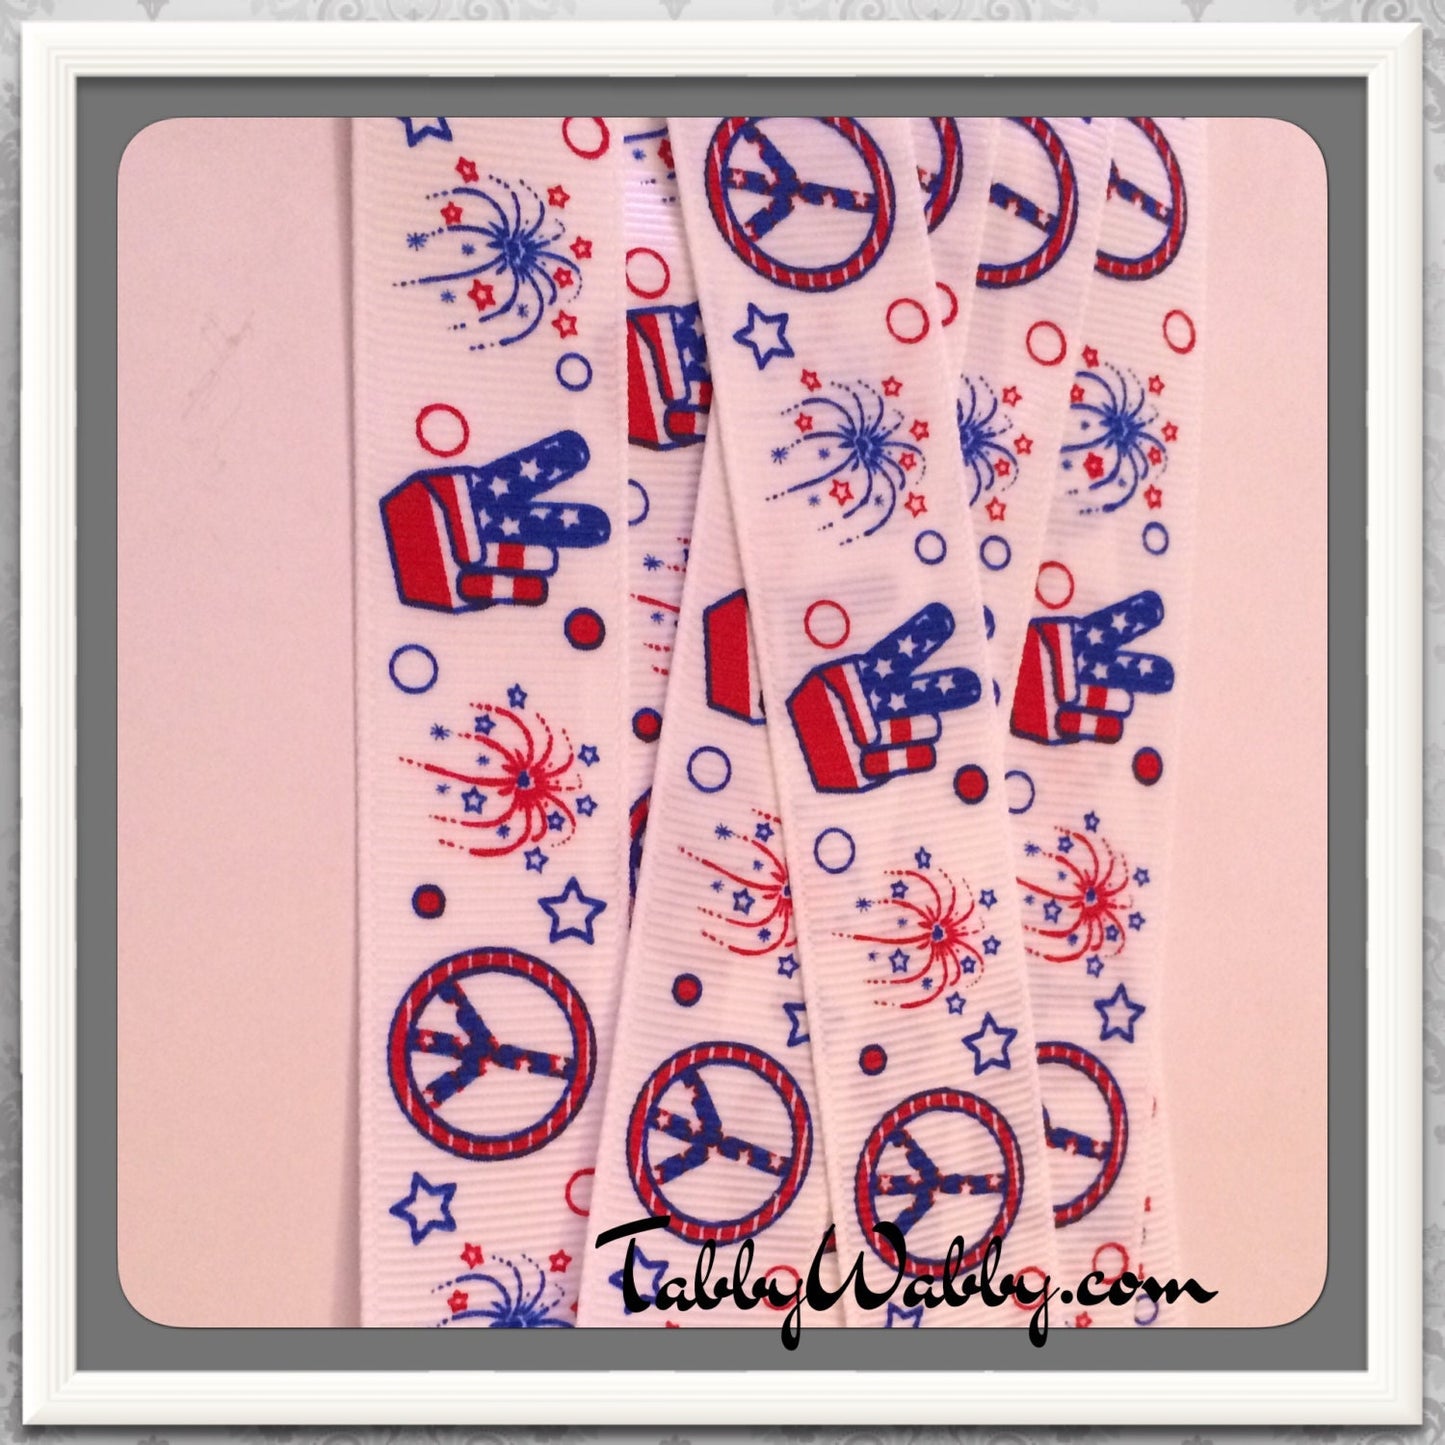 USA Pride w/ Peace Hand *fireworks & Peace sign 7/8" Grosgrain Ribbon 5 Yards - TWRH